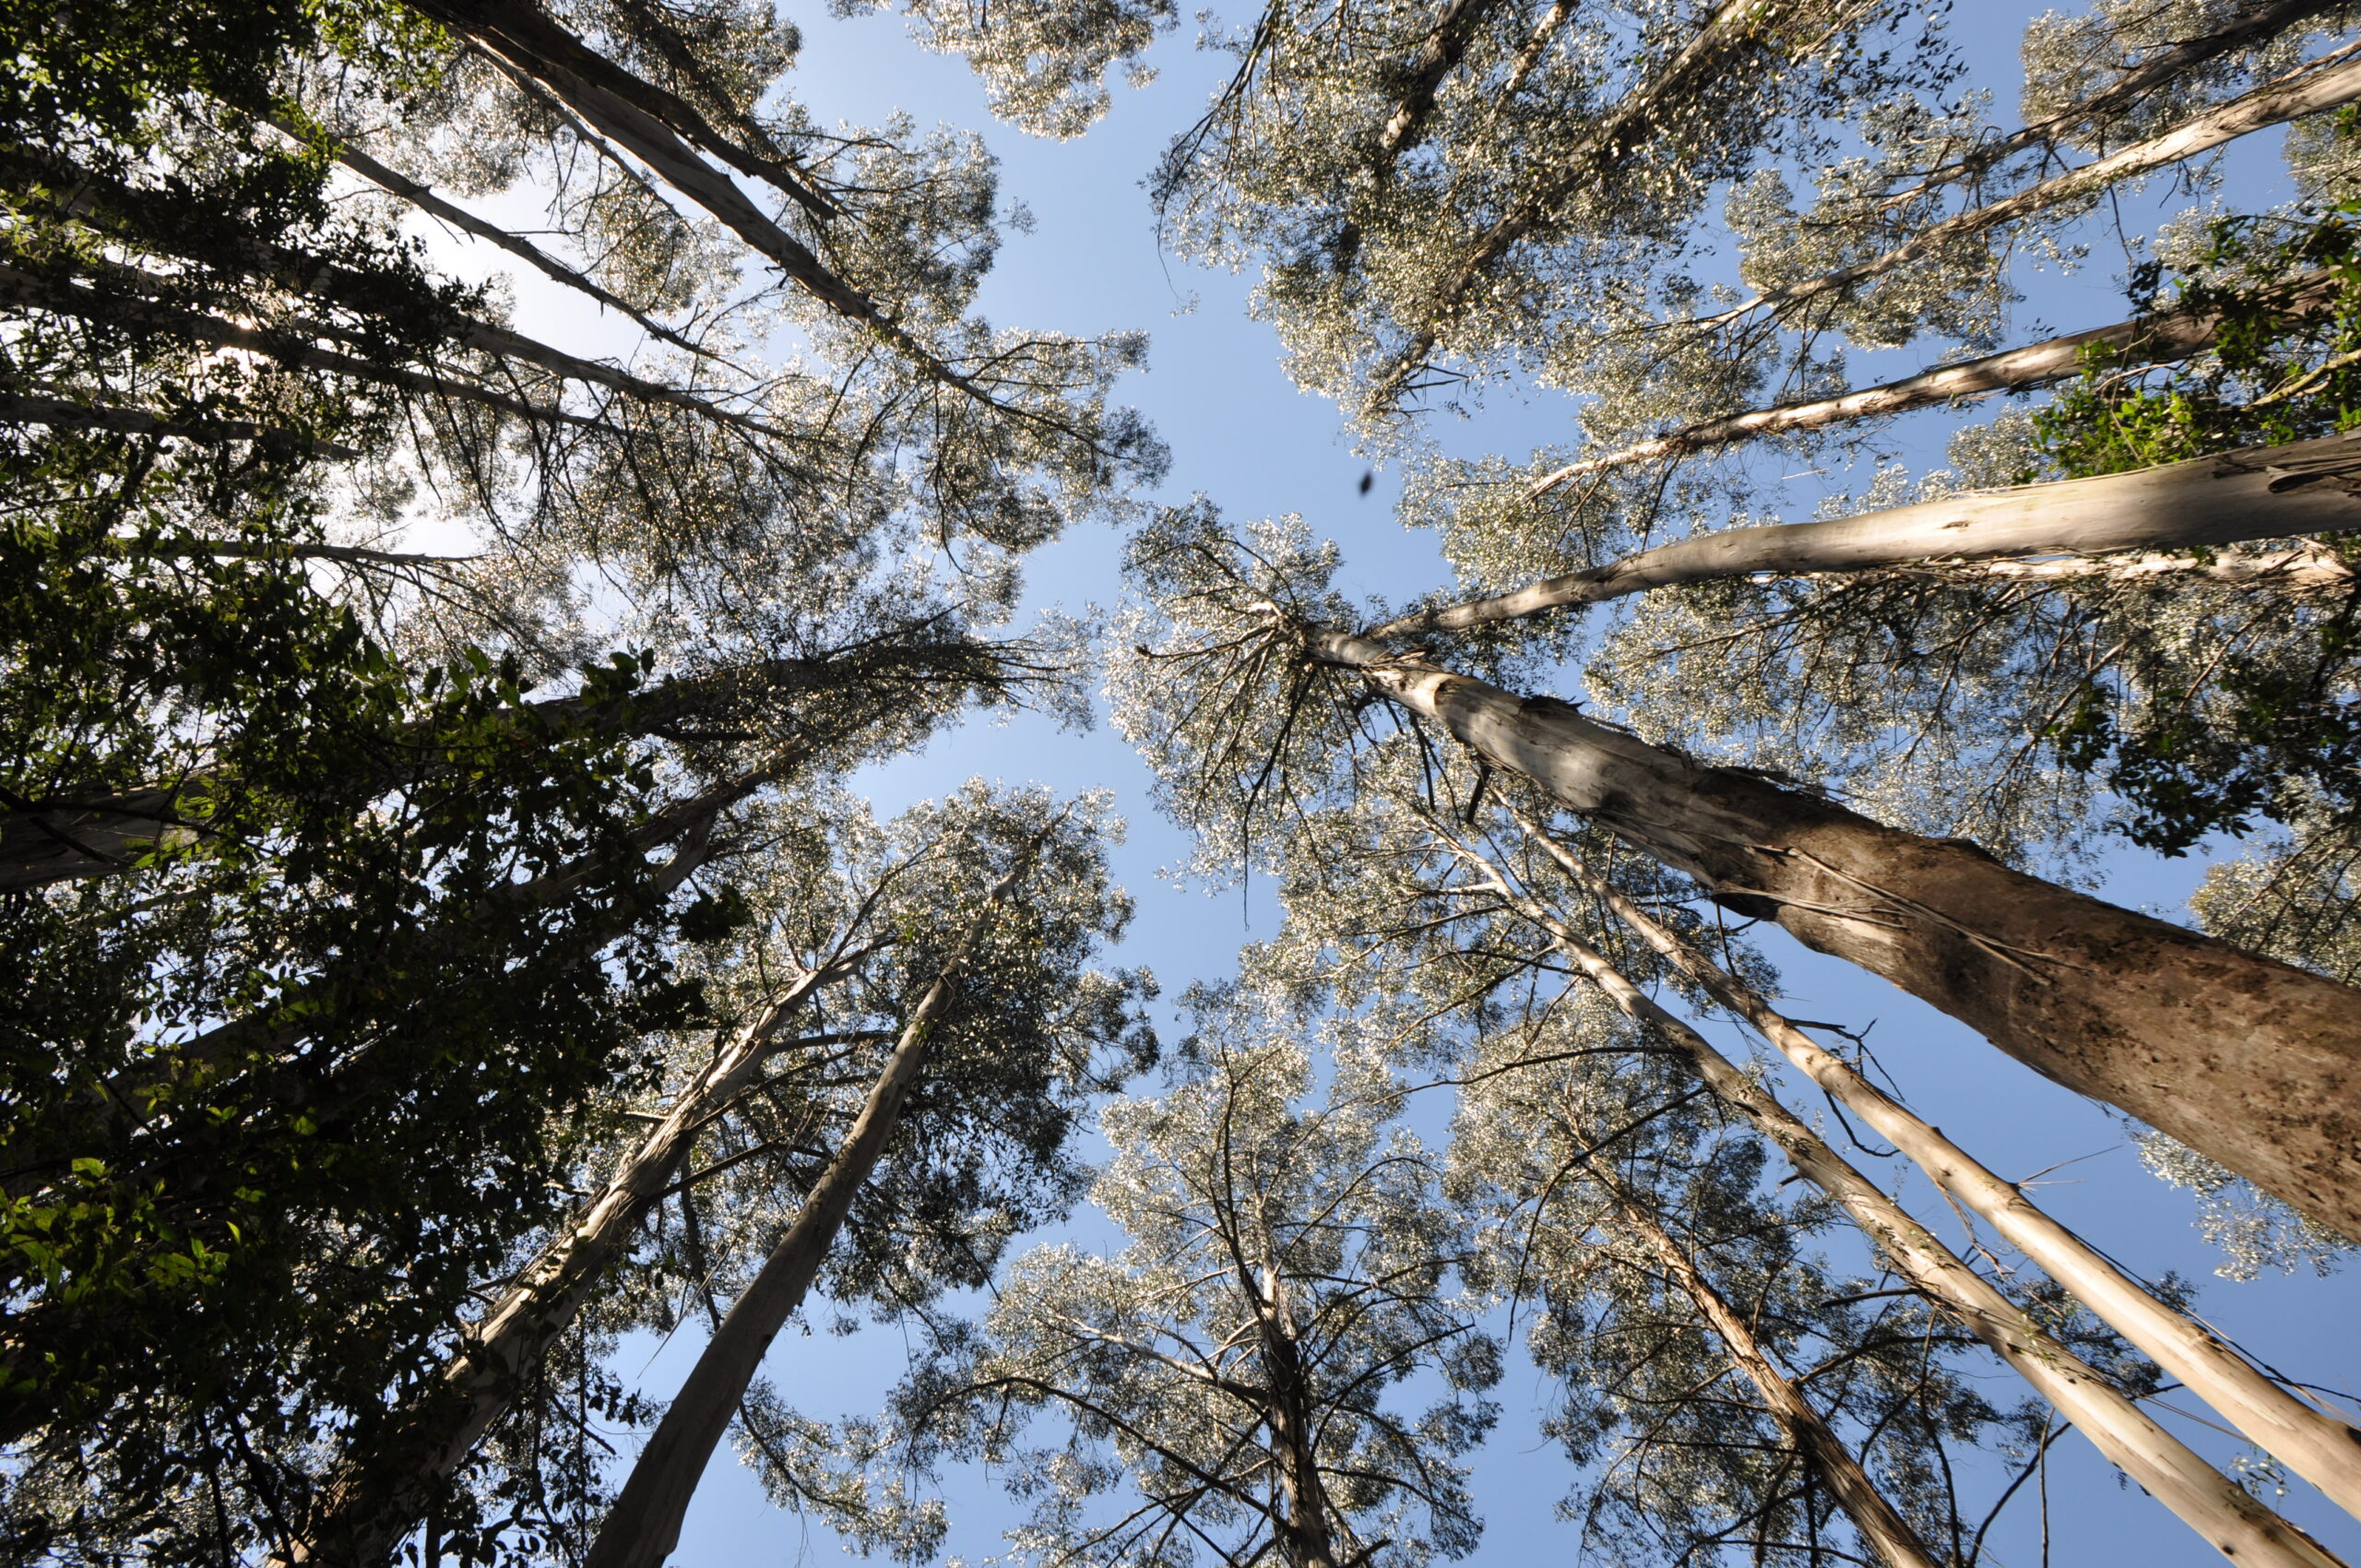 Gum Tree Forest Canopy from below standing looking up